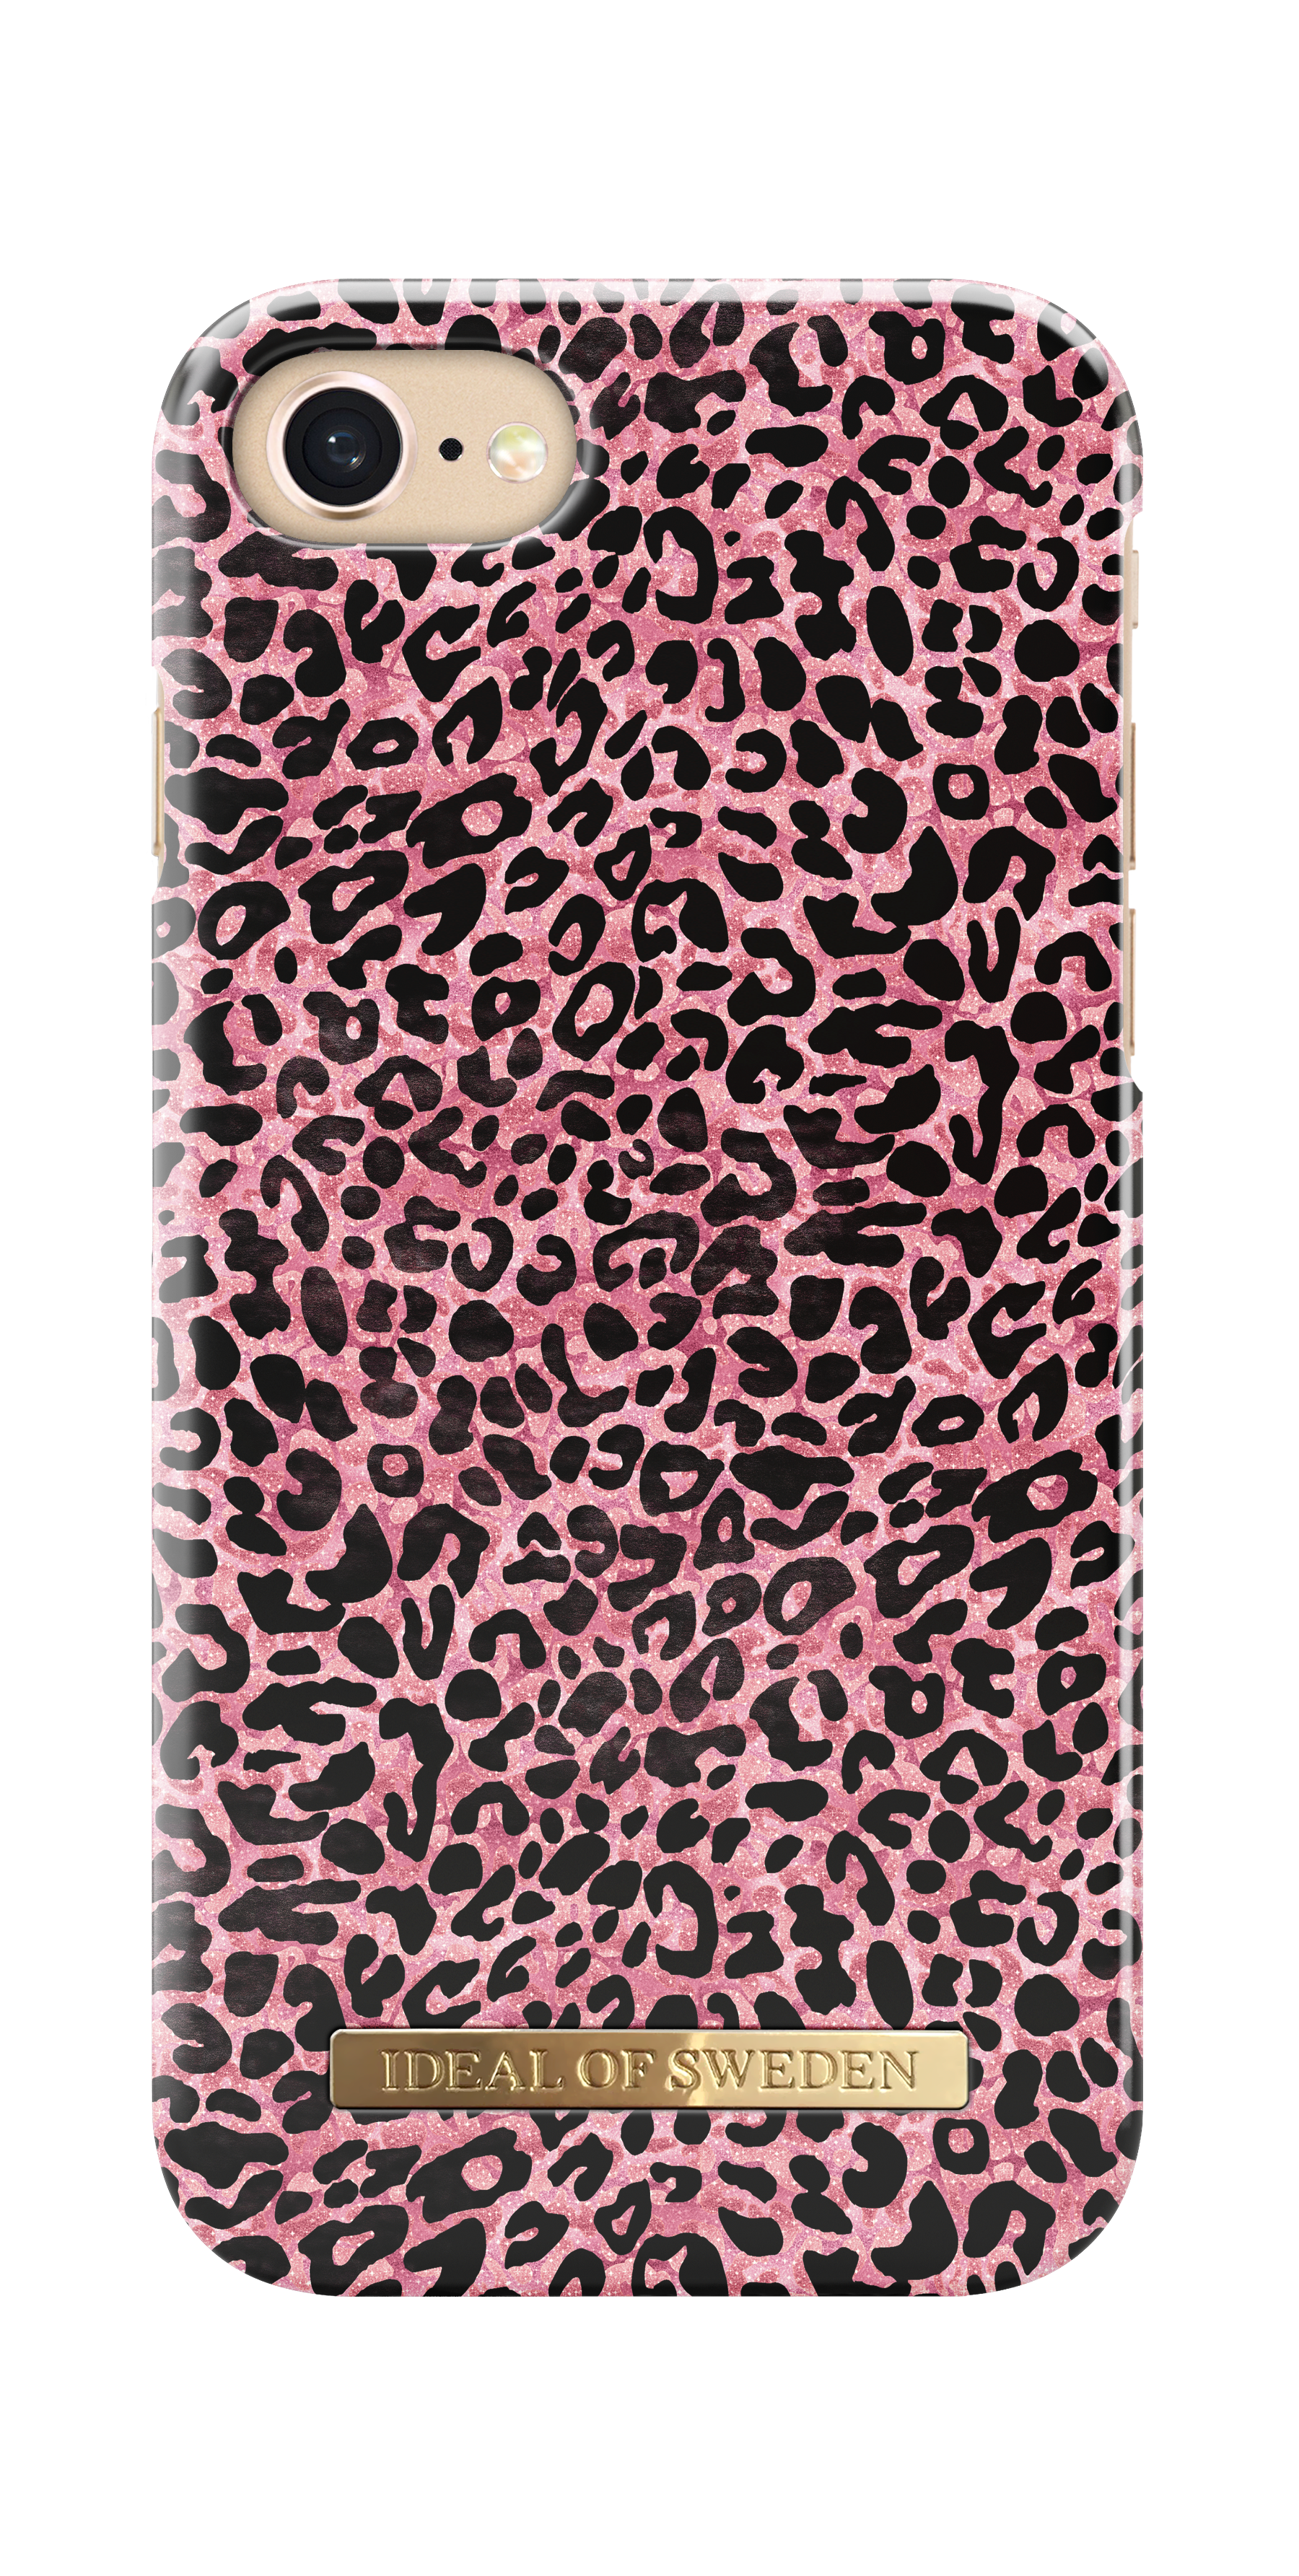 IDEAL OF SWEDEN IDFCSS19-I7-118, Backcover, SE iPhone Apple, 7, iPhone Lush 6(S), 8, iPhone Leopard (2020), iPhone